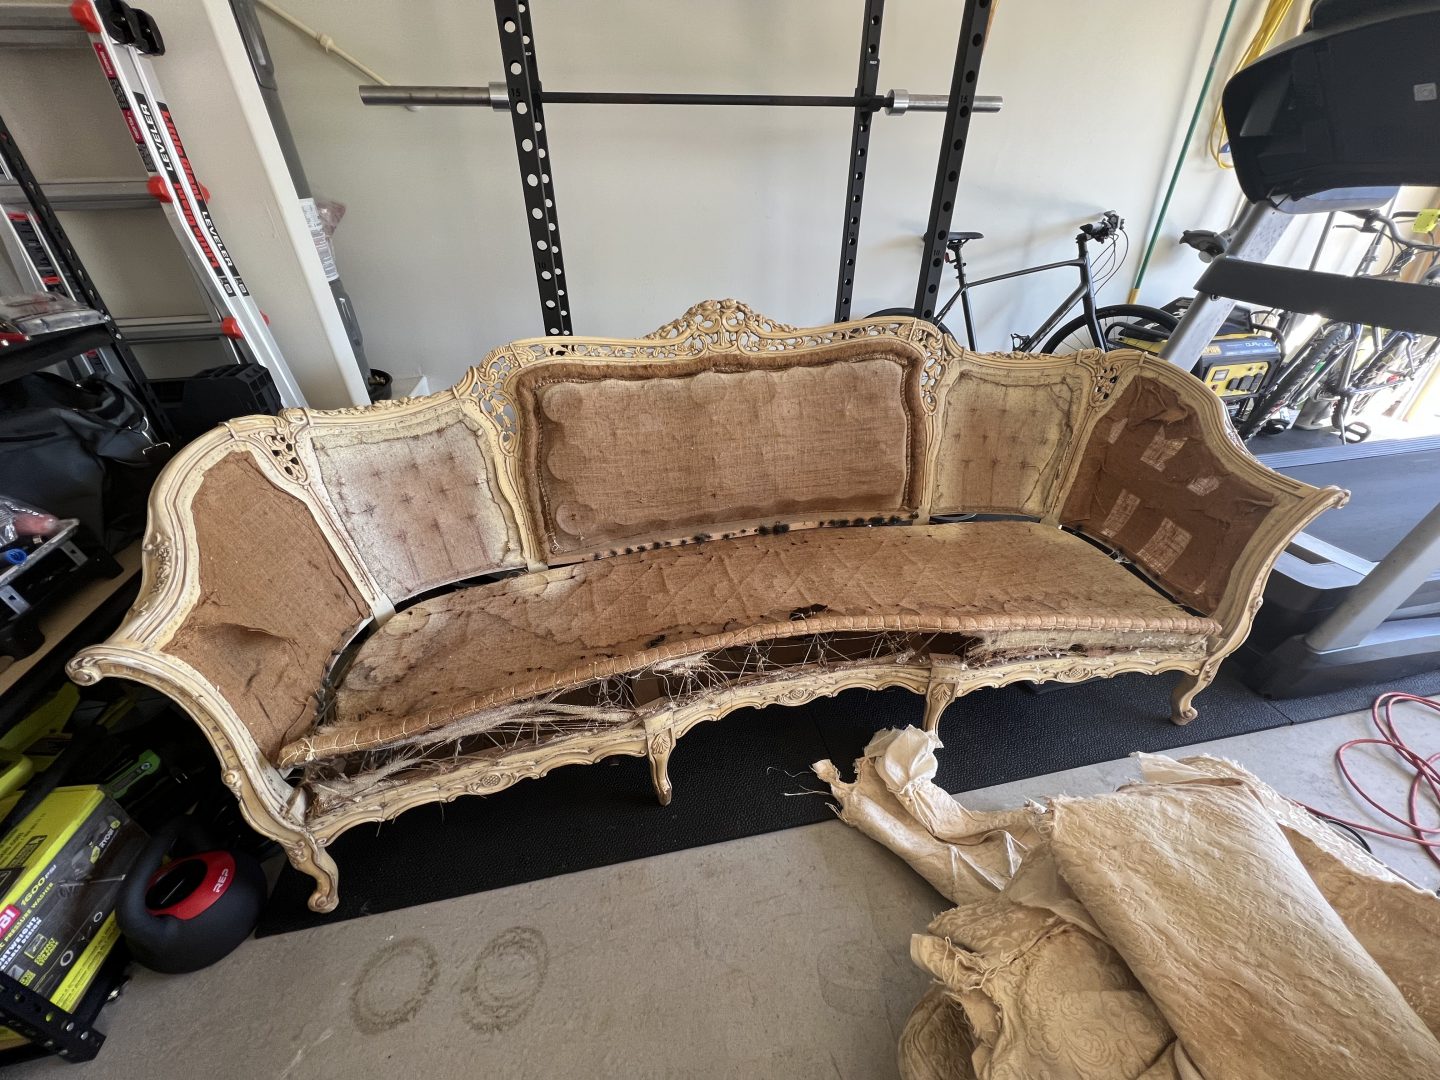 Deconstructing Antique Couch and Stripping Paint | DIY